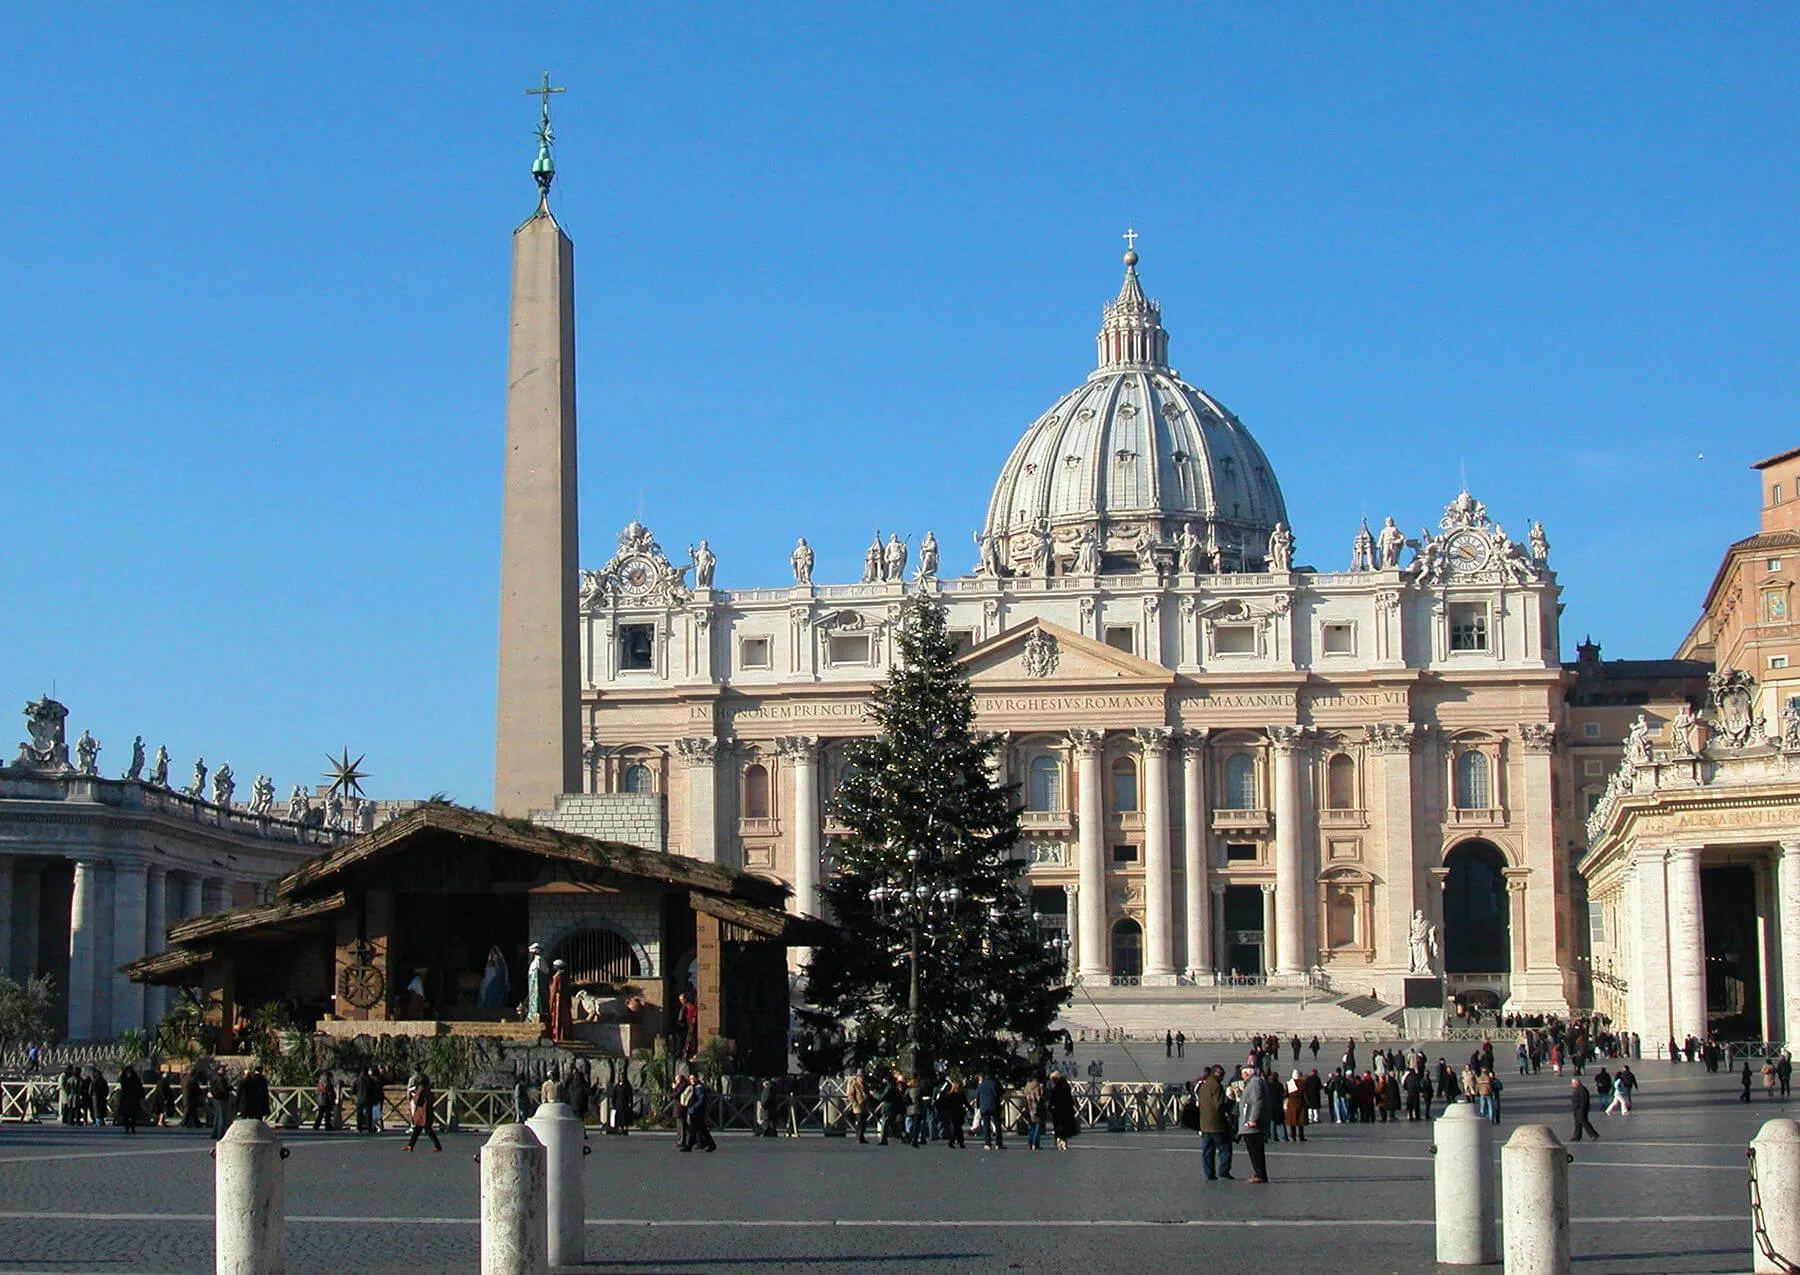 The tree lighting in front of St. Peter's Basilica takes place in mid-December, but the life-size nativity scene isn't unveiled until Christmas Eve